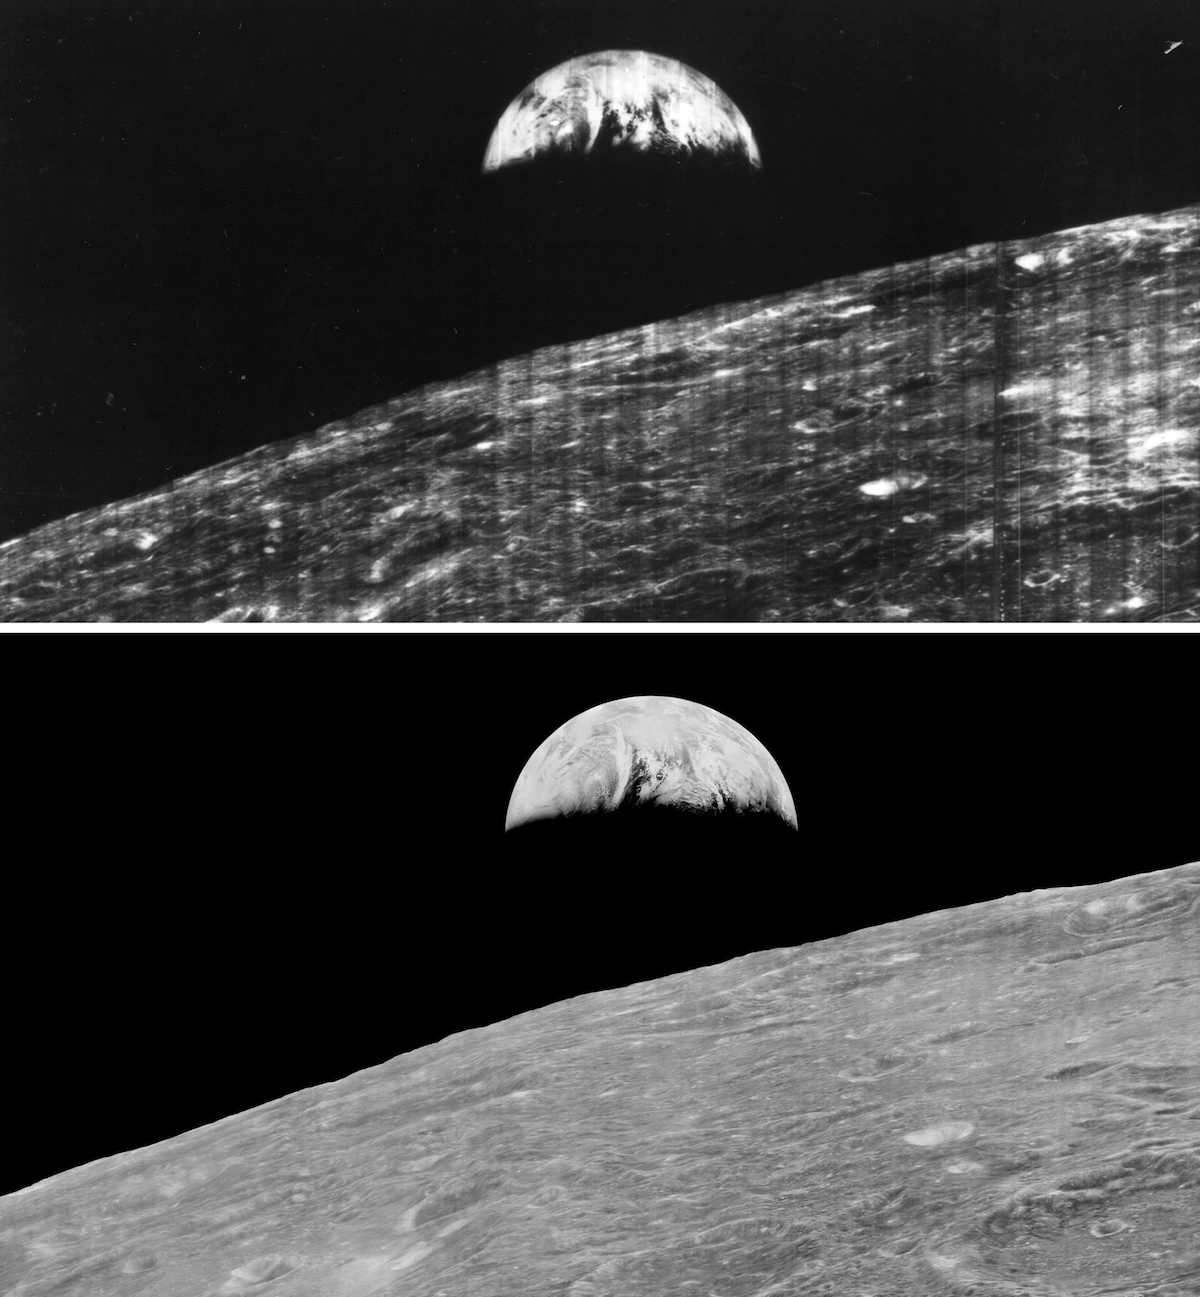 earth rising over lunar horizon in two images, the original and the smoother, restored version 